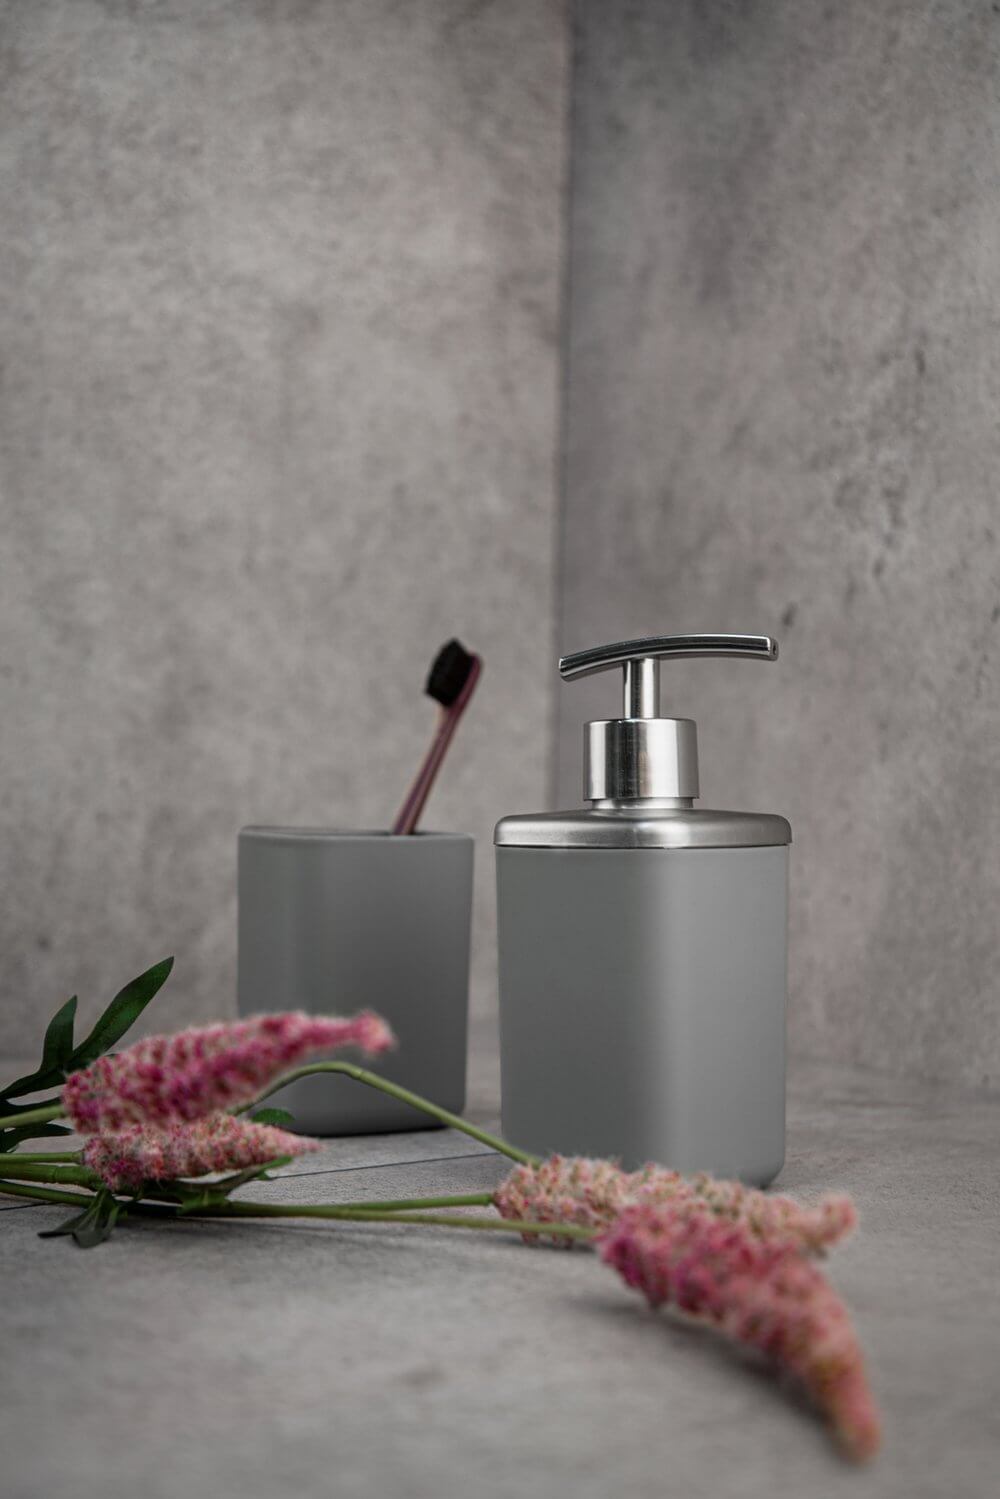 Barcelona Soap Dispenser Anthracite - BATHROOM - Soap Dispensers and Trays - Soko and Co